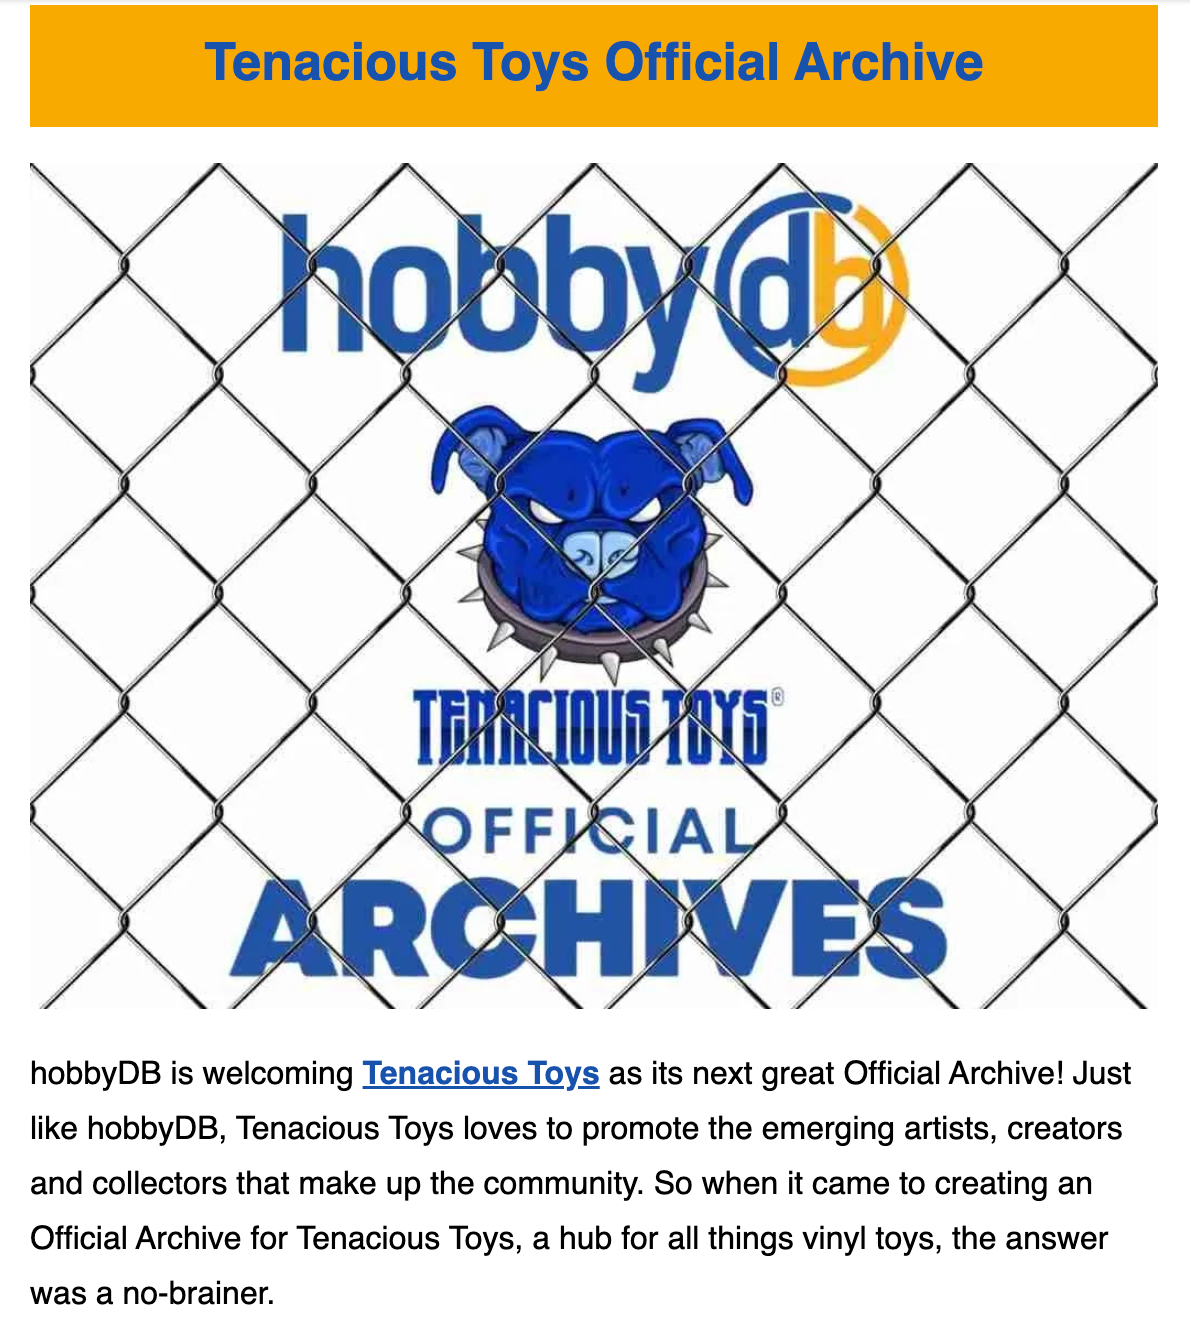 Tenacious Toys Official Archive on hobbyDB